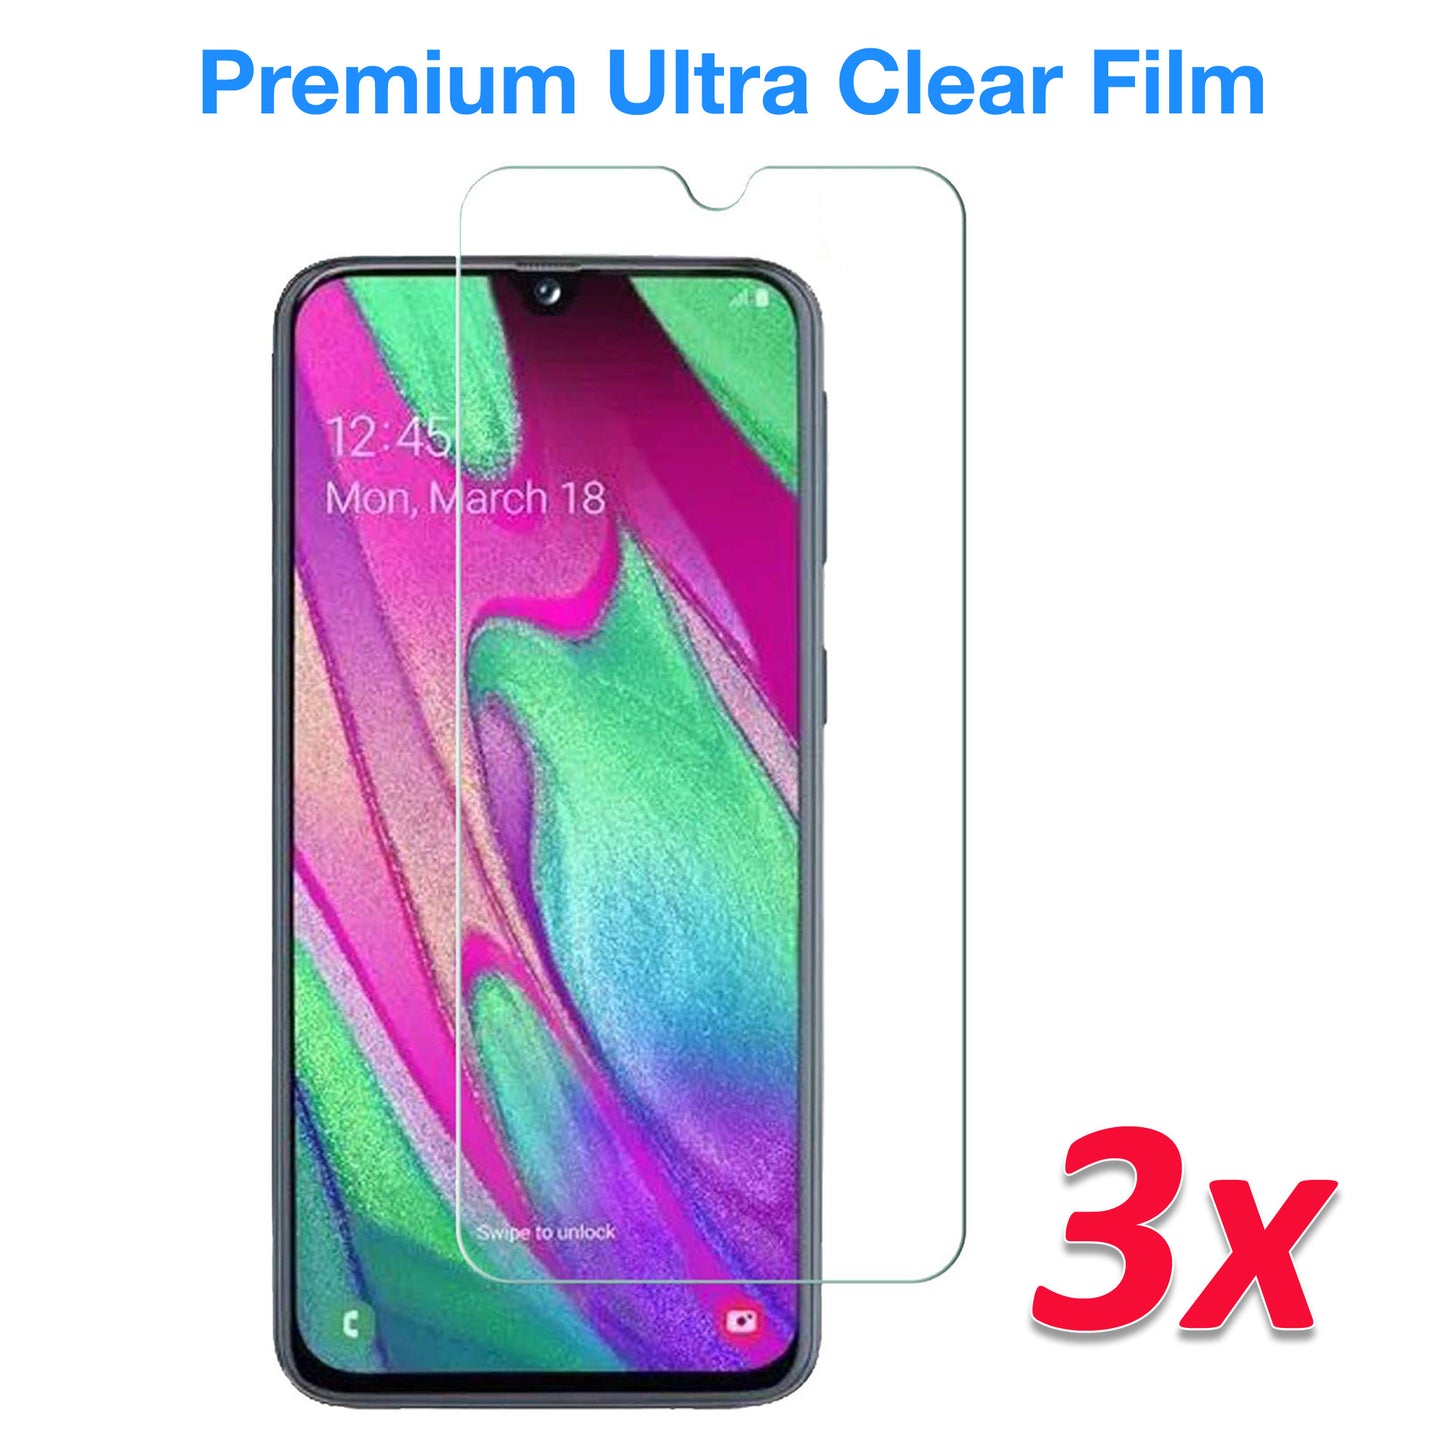 [3 Pack] MEZON Samsung Galaxy A90 5G Ultra Clear Screen Protector Case Friendly Film (A90 5G, Clear)